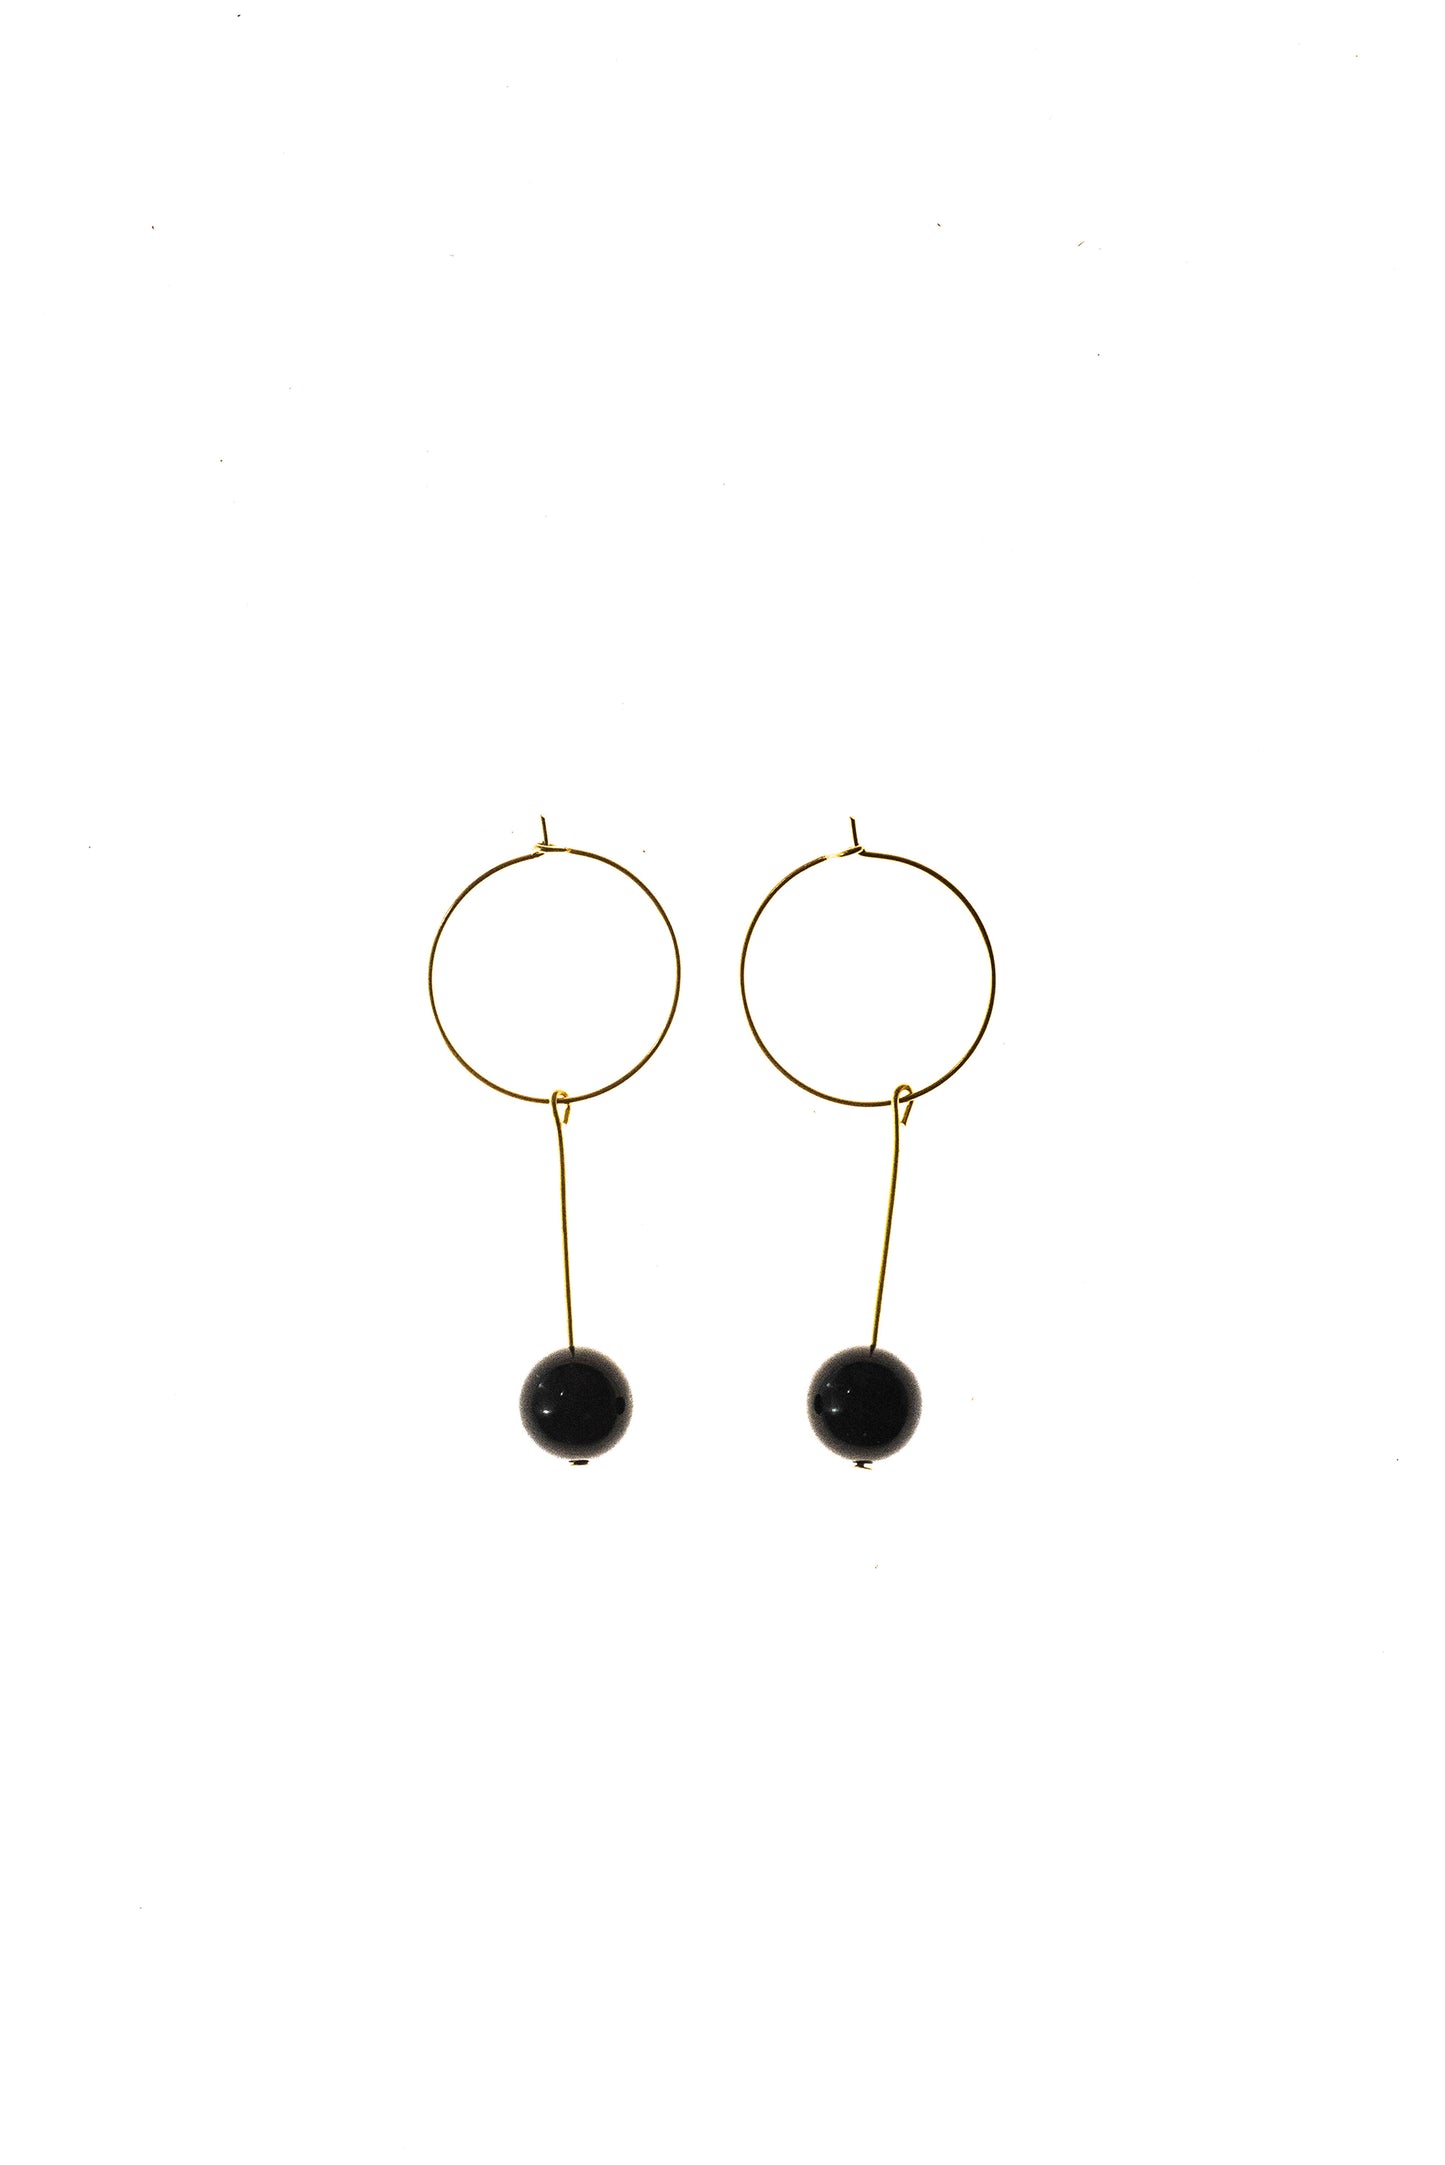 Earrings made of 24K gold plated brass and onyx.